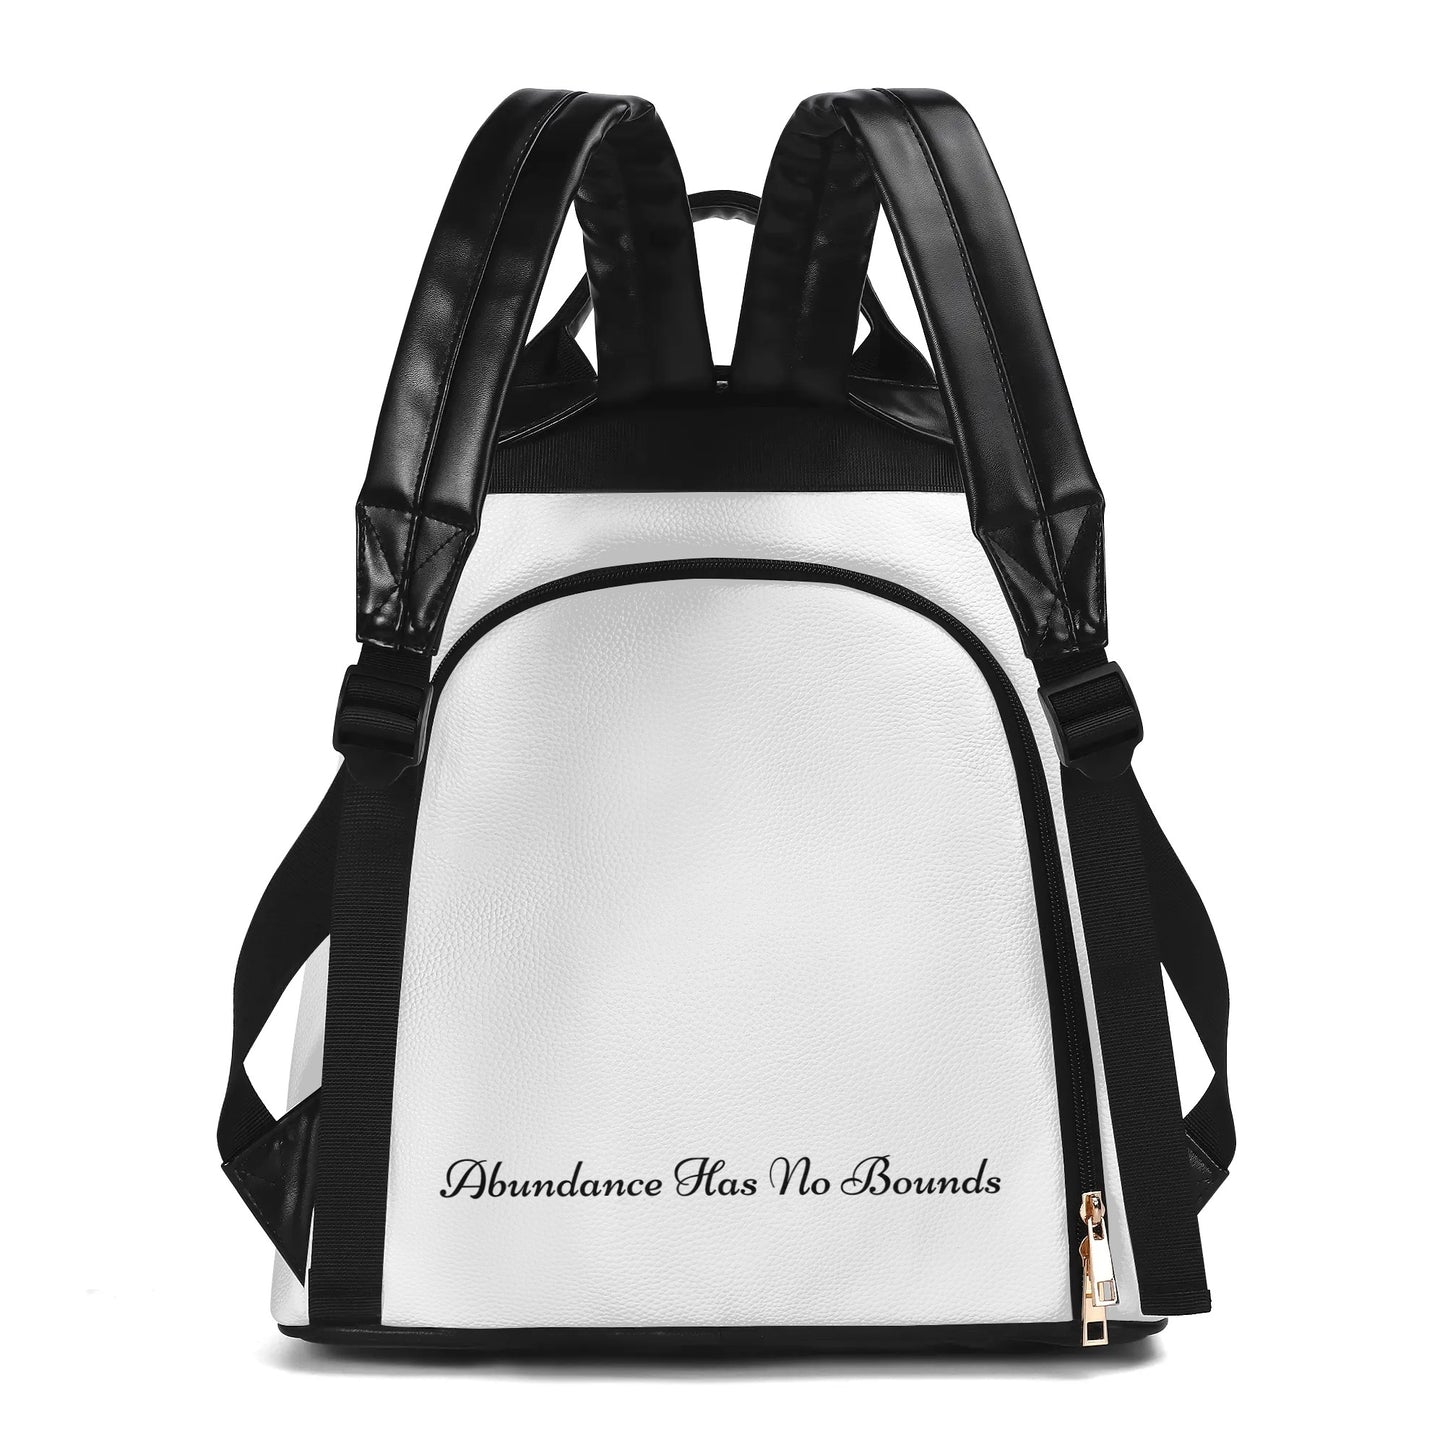 ALL WHITE VEGAN LEATHER ANTI-THEFT BACKPACK